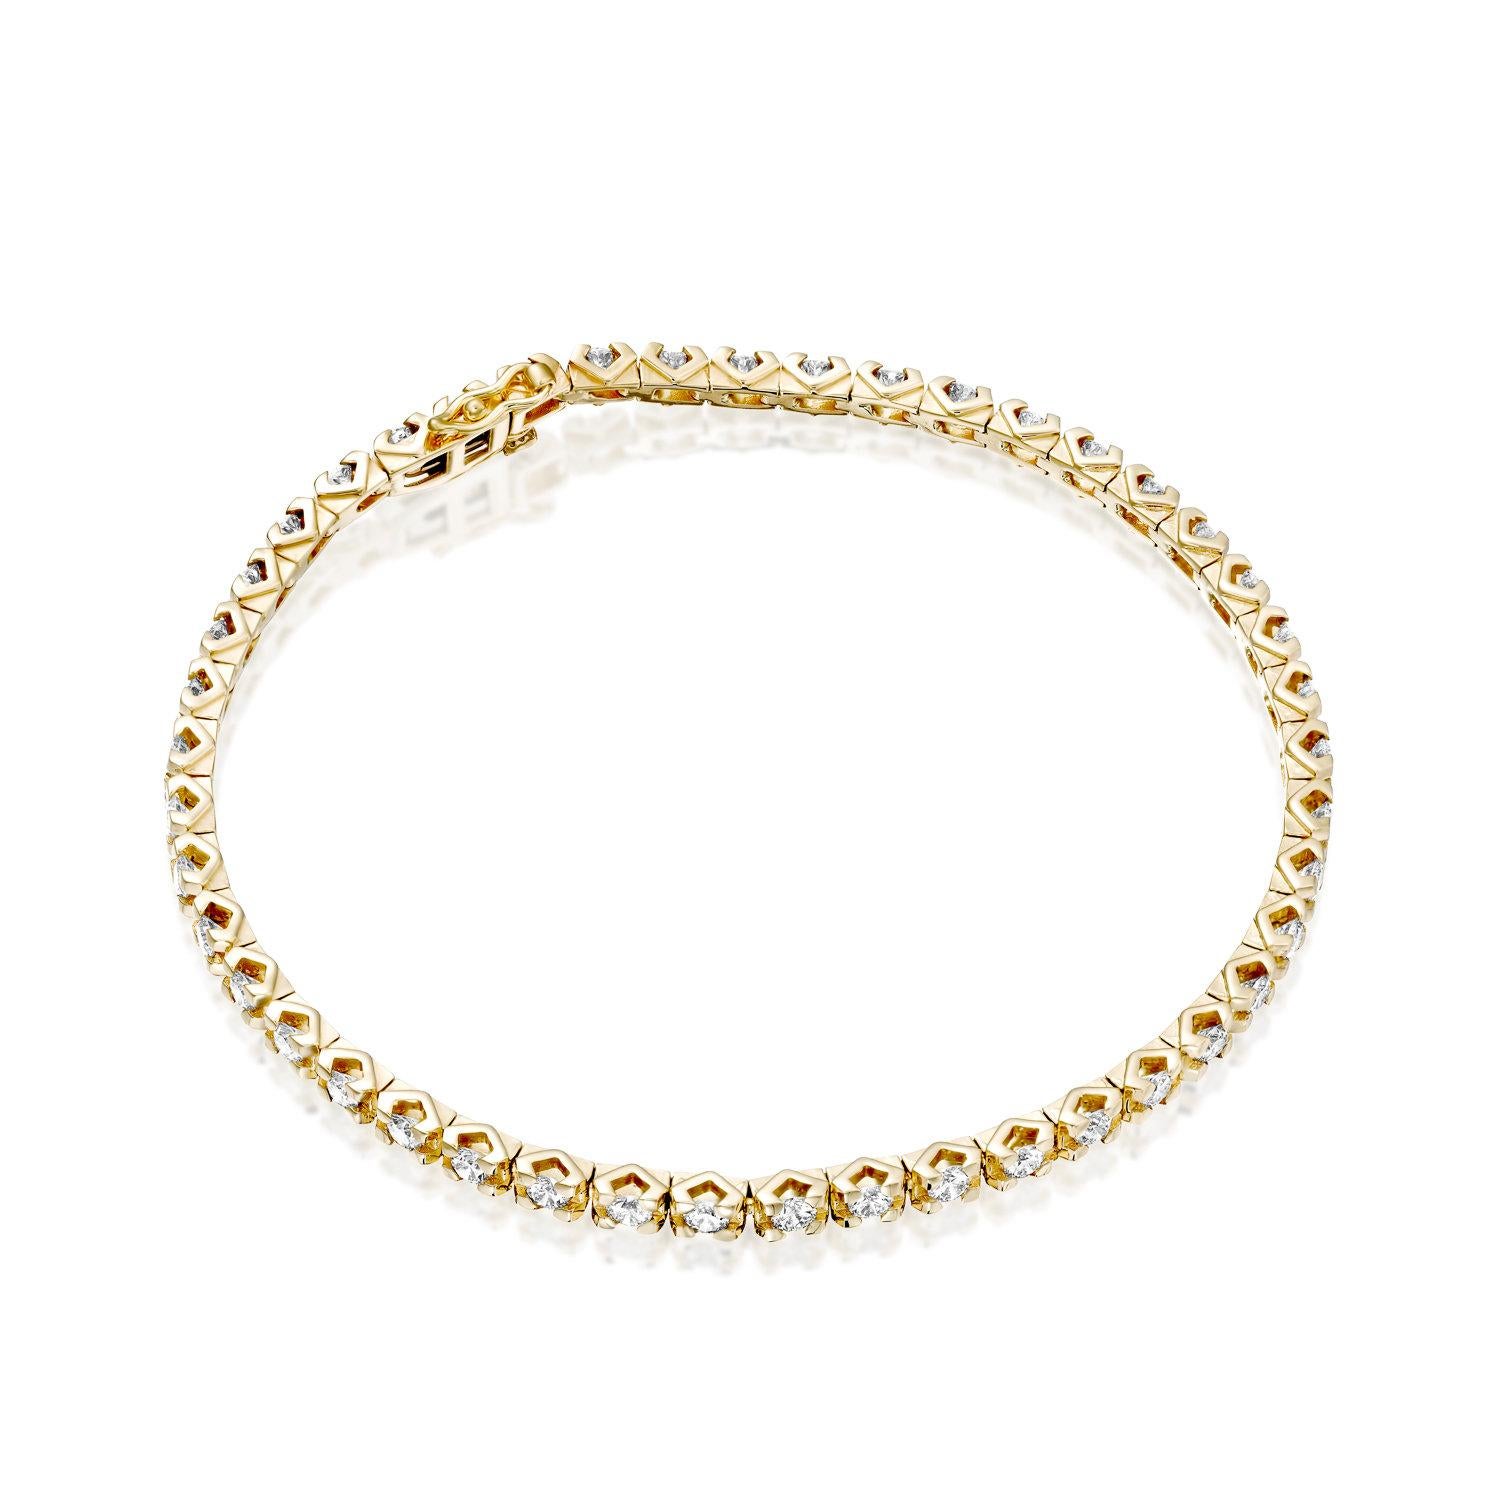 A beautiful large and classic diamond bracelet made of 14K Yellow Gold set with Natural Diamonds.bThe total carat weight of this beautiful Diamond bracelet is 2 1/2 carat, D-F color and VS clarity. 

  
Metal Type: 
This bracelet can be made in